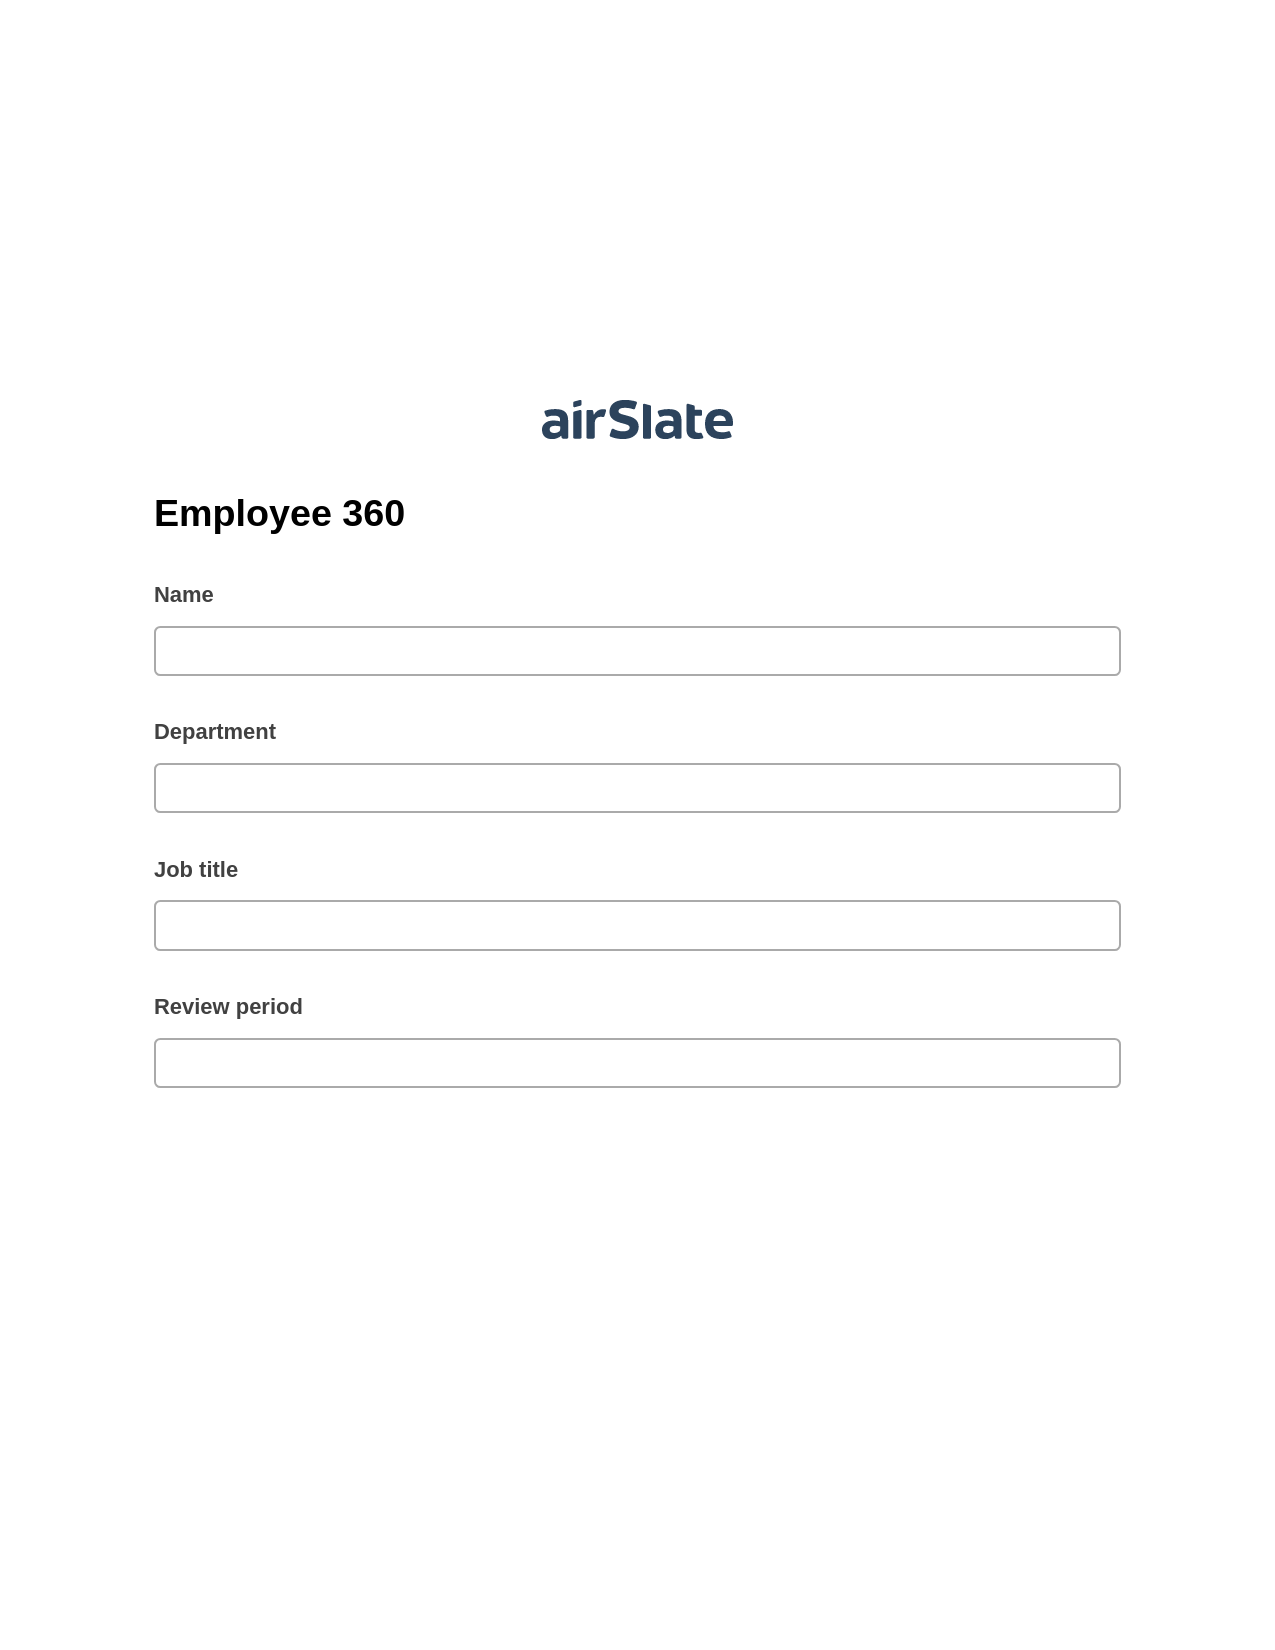 Multirole Employee 360 Pre-fill Dropdowns from CSV file Bot, Create QuickBooks Invoice Bot, Archive to Box Bot